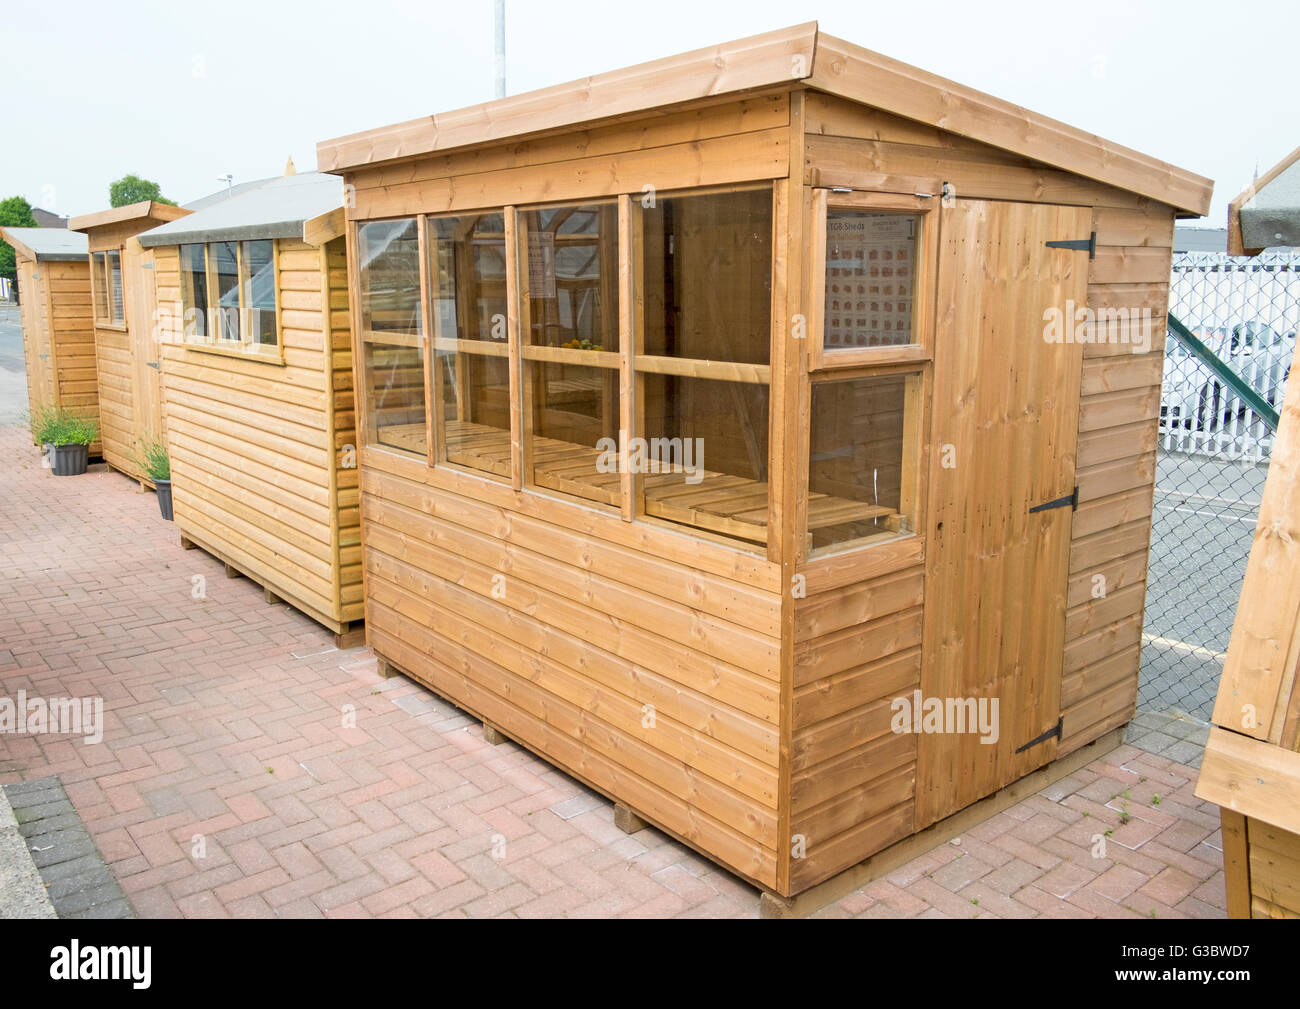 Tanalised timber workshop, home office or summer houses, of log lap construction, built of redwood or pine, Lancashire, UK Stock Photo